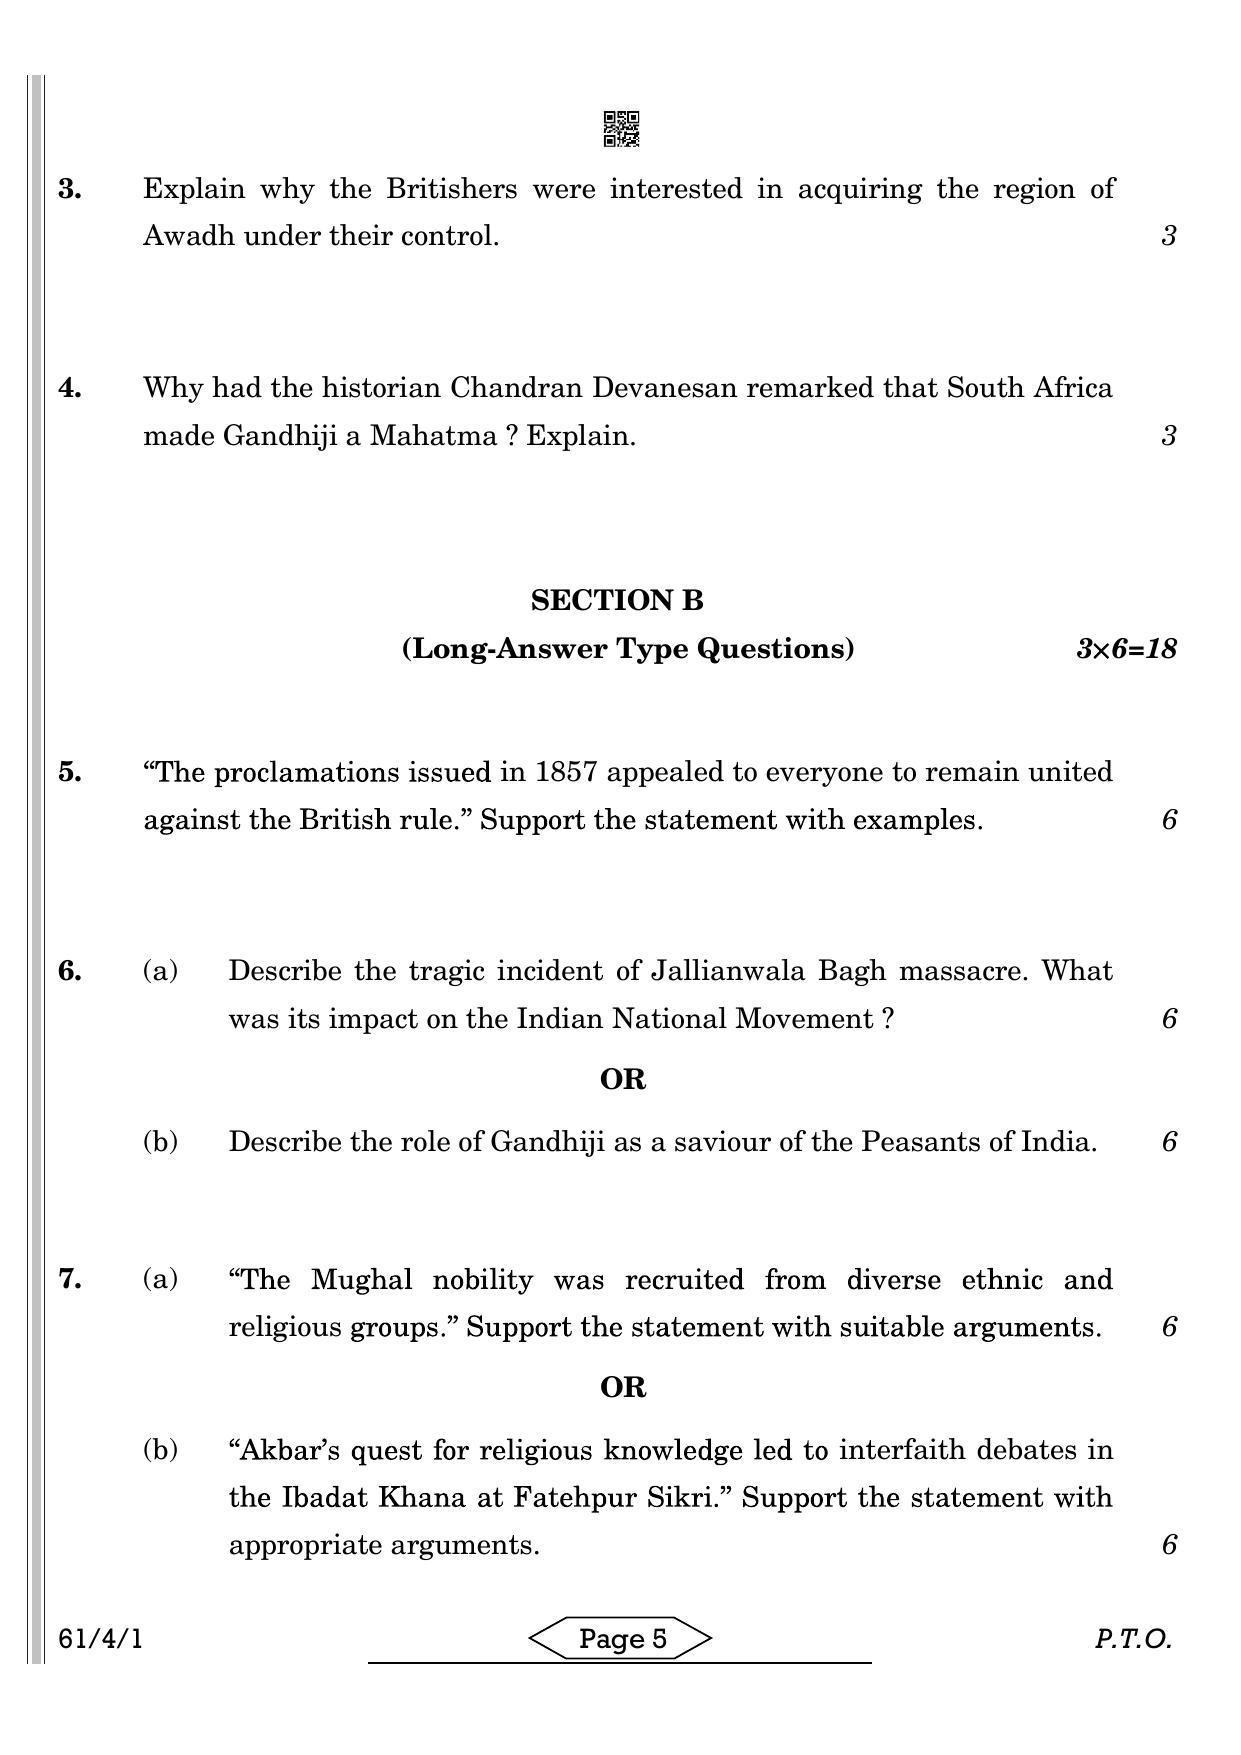 CBSE Class 12 61-4-1 History 2022 Question Paper - Page 5